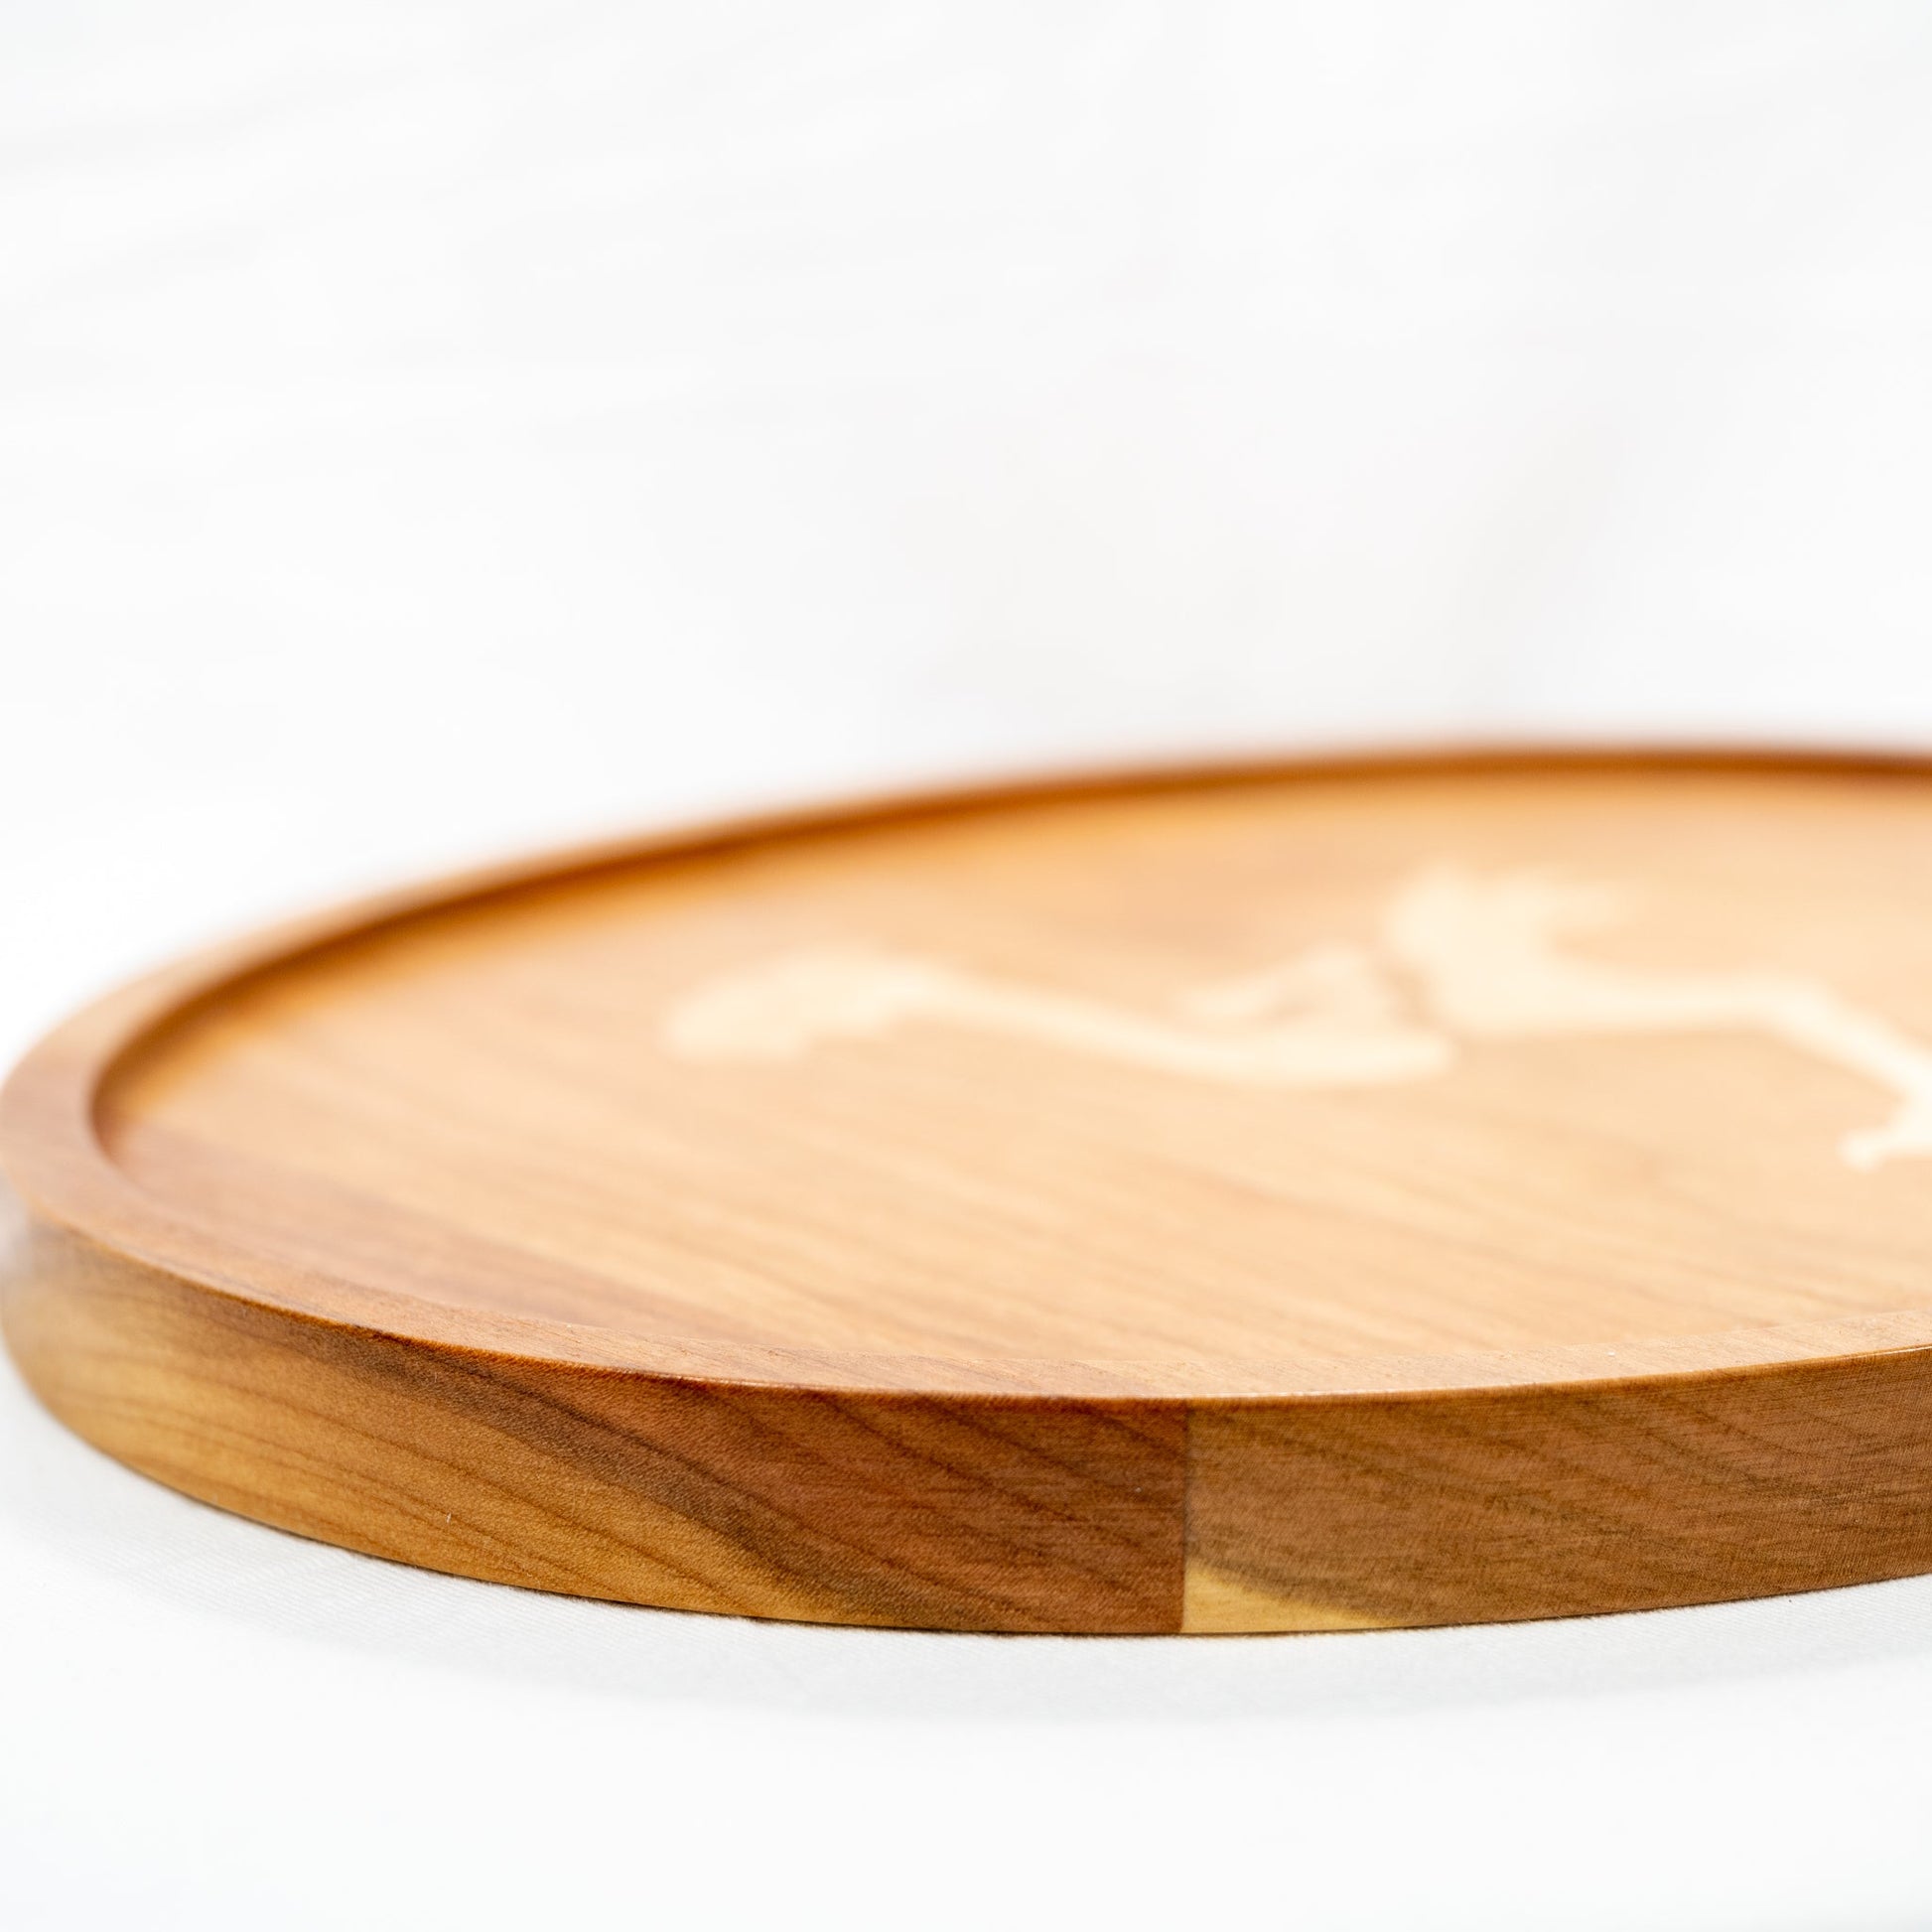 Handmade solid Cherry and inlaid Maple wood platter serving tray with a Final Fantasy Chocobo